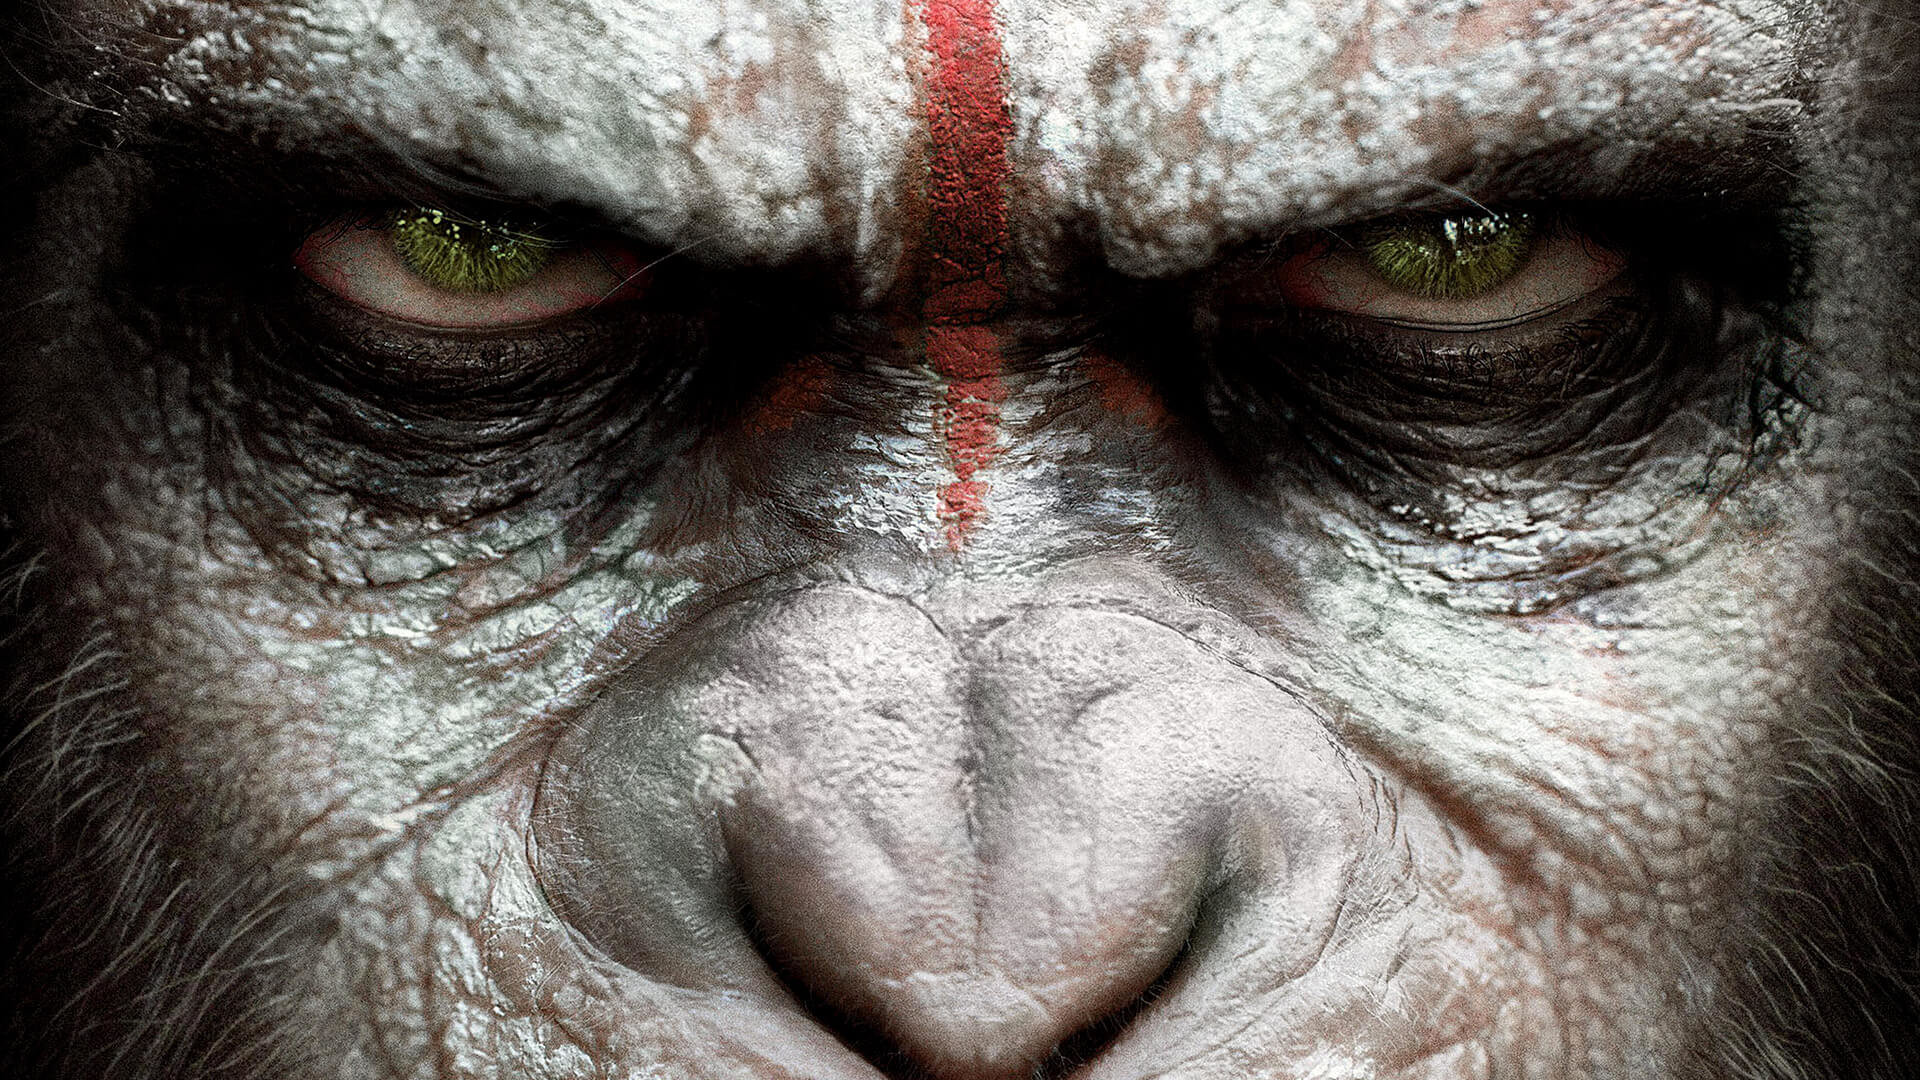 Planet of the Apes Wallpapers.